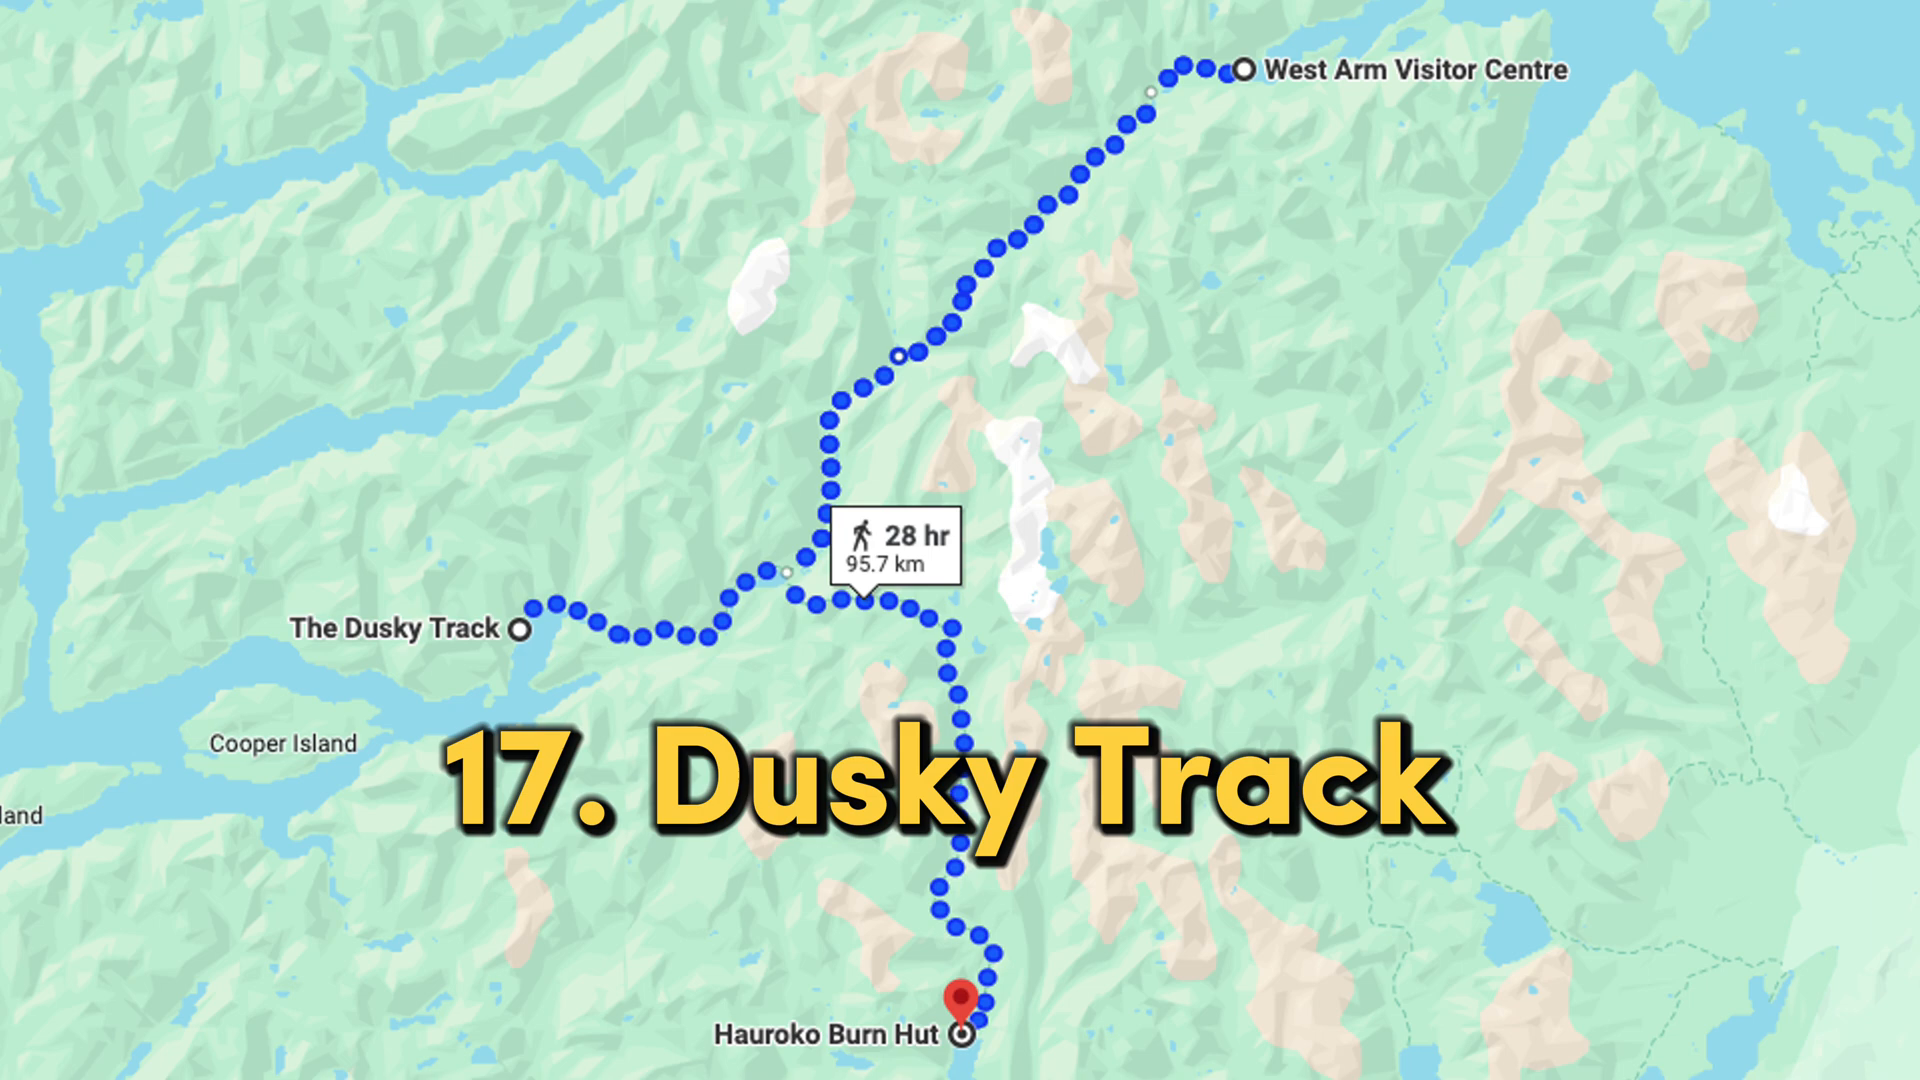 The Dusky Track is the most challenging Hikes in Fiordland